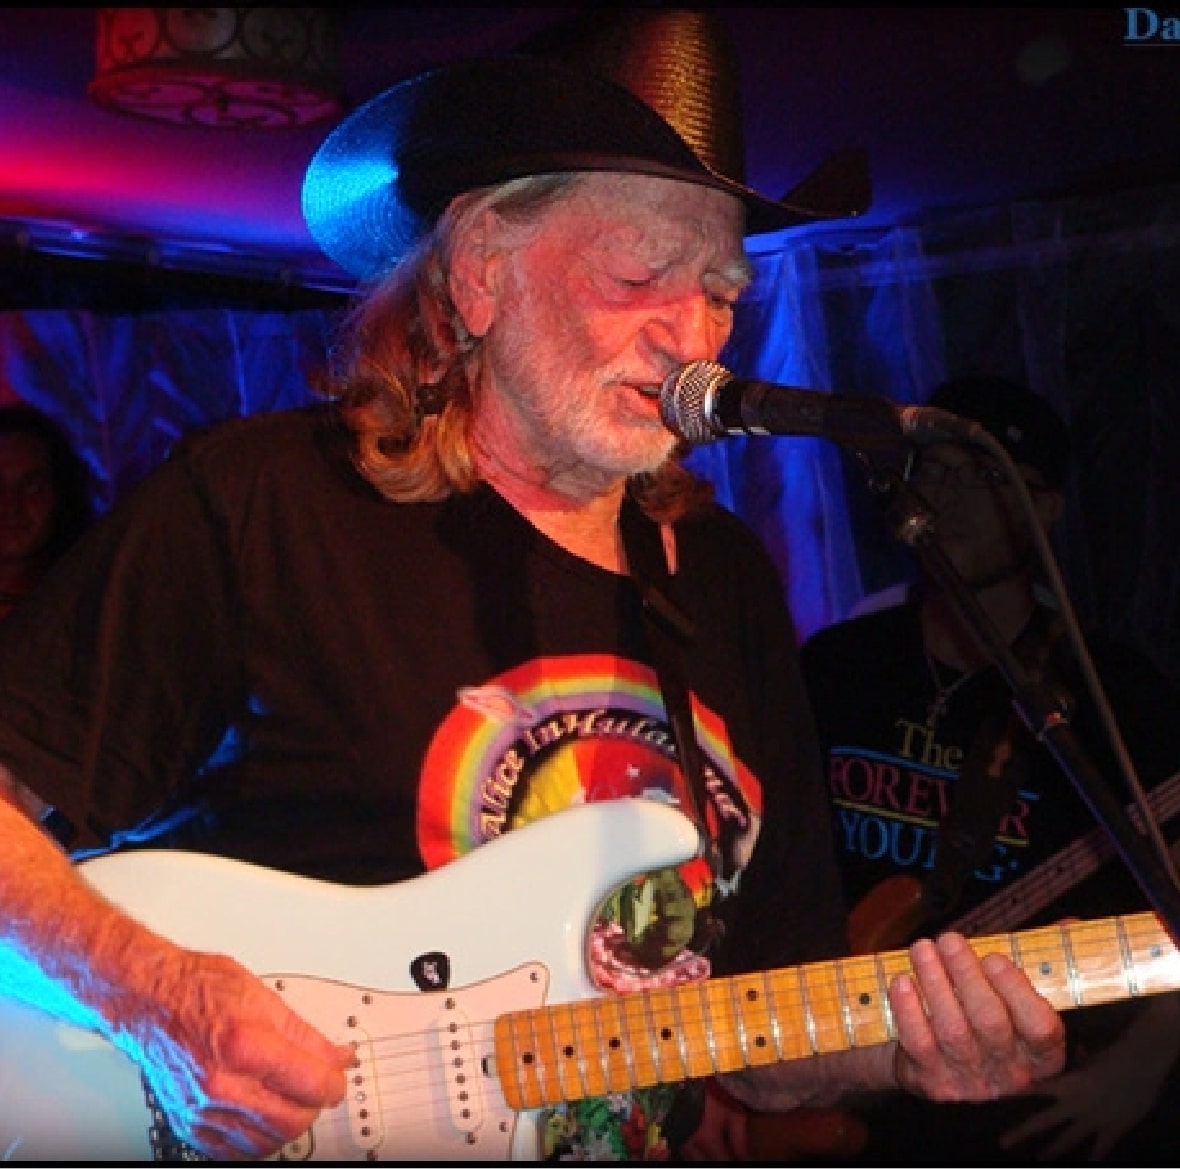 Willie Nelson playing a guitar